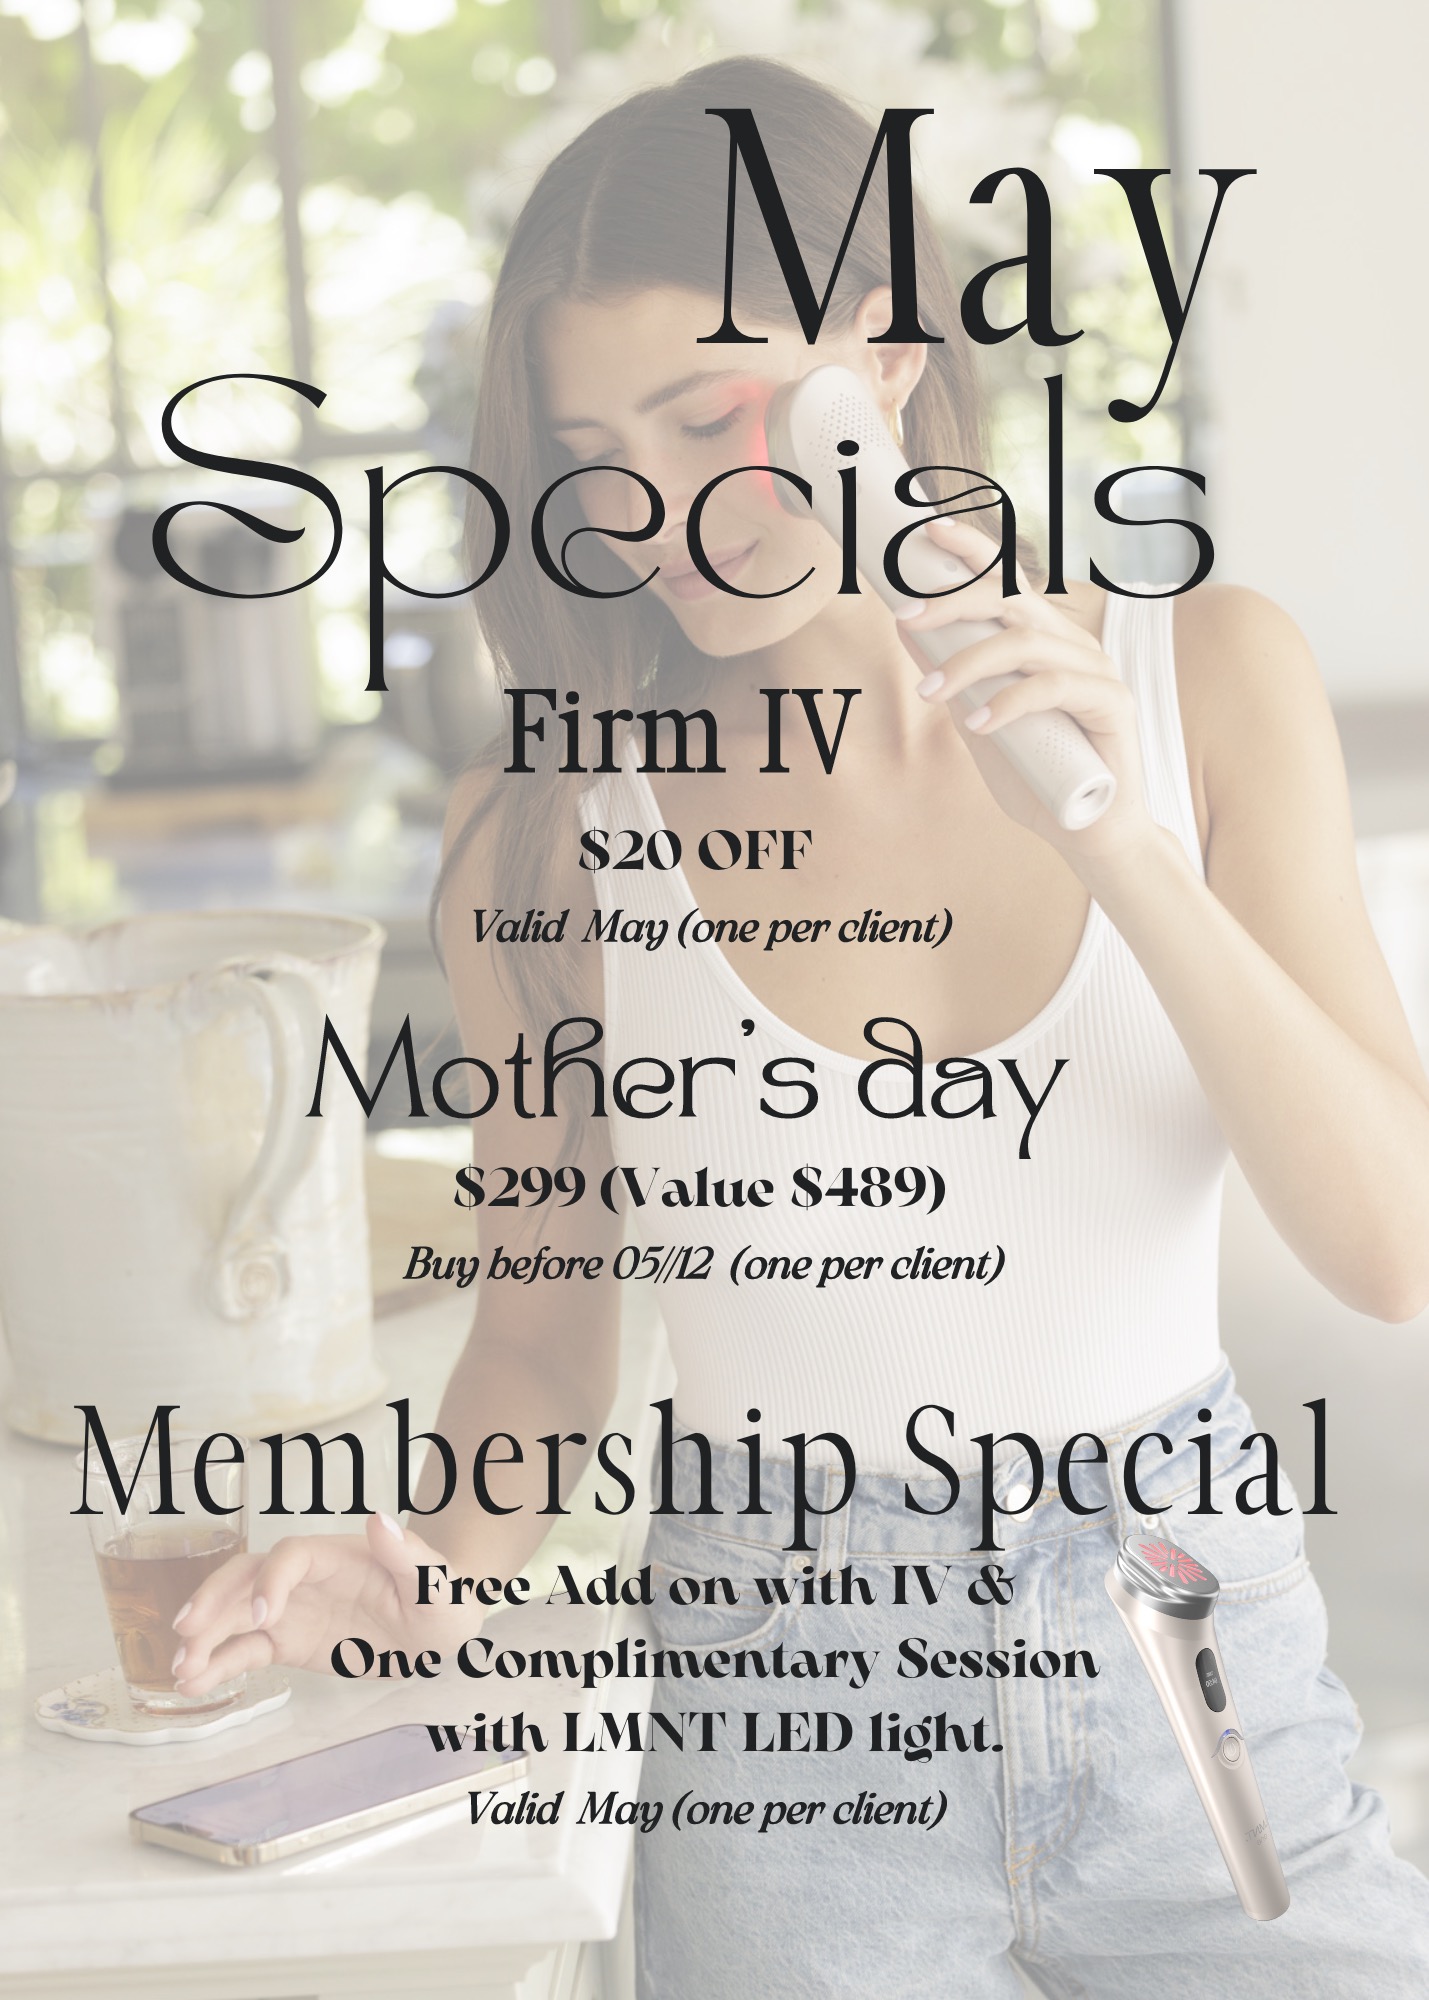 Mother’s Day to Memorial Day: Amazing Specials at Jolie Visage in Buford